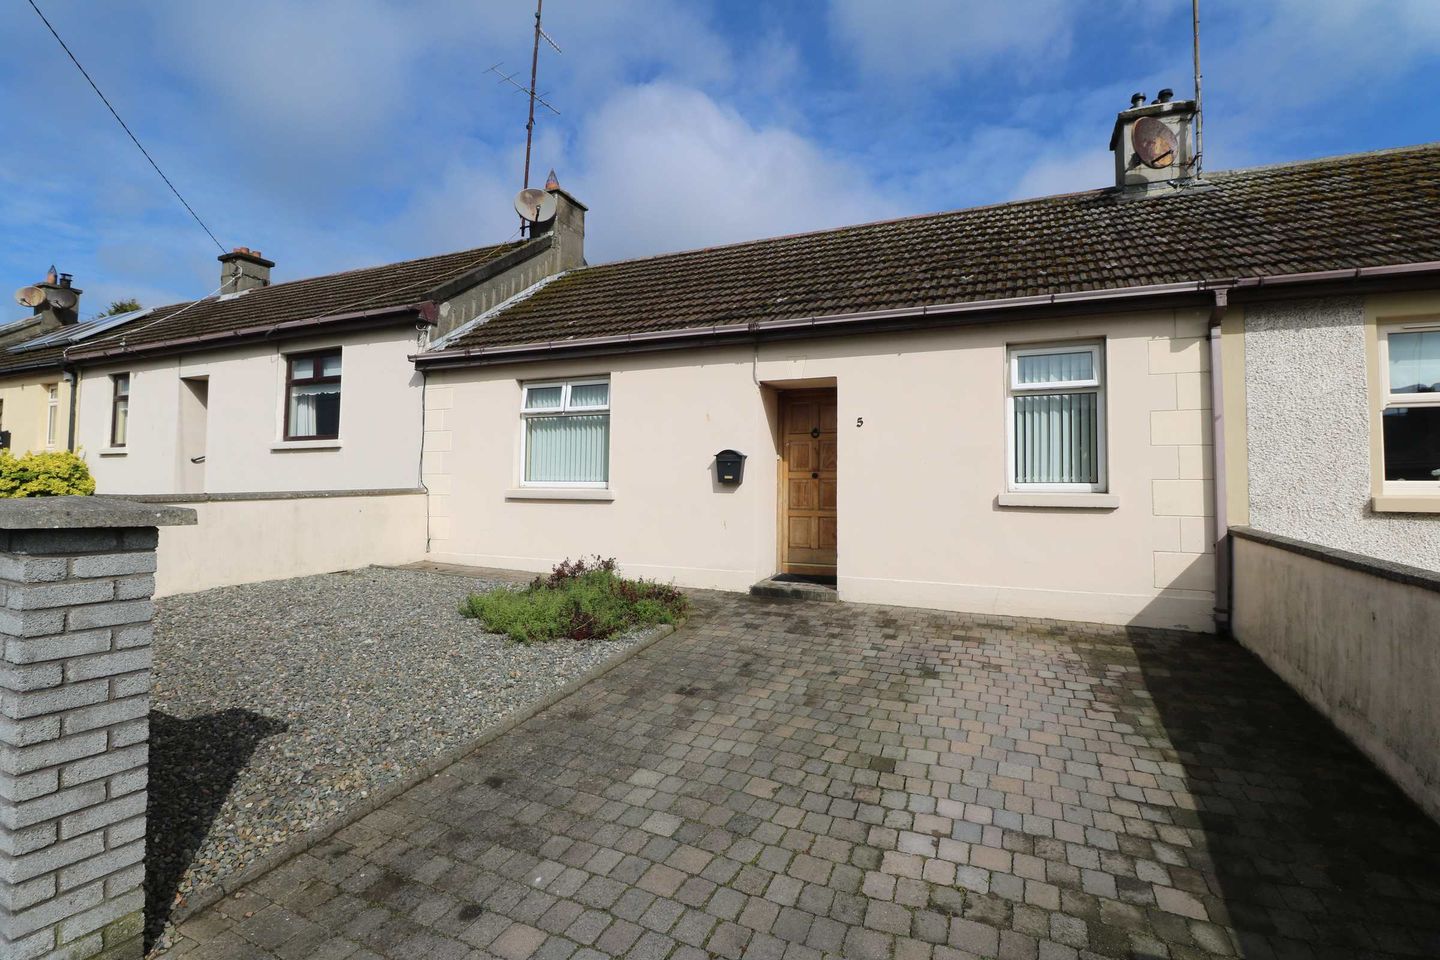 5 Glenview, Drogheda, Co. Louth